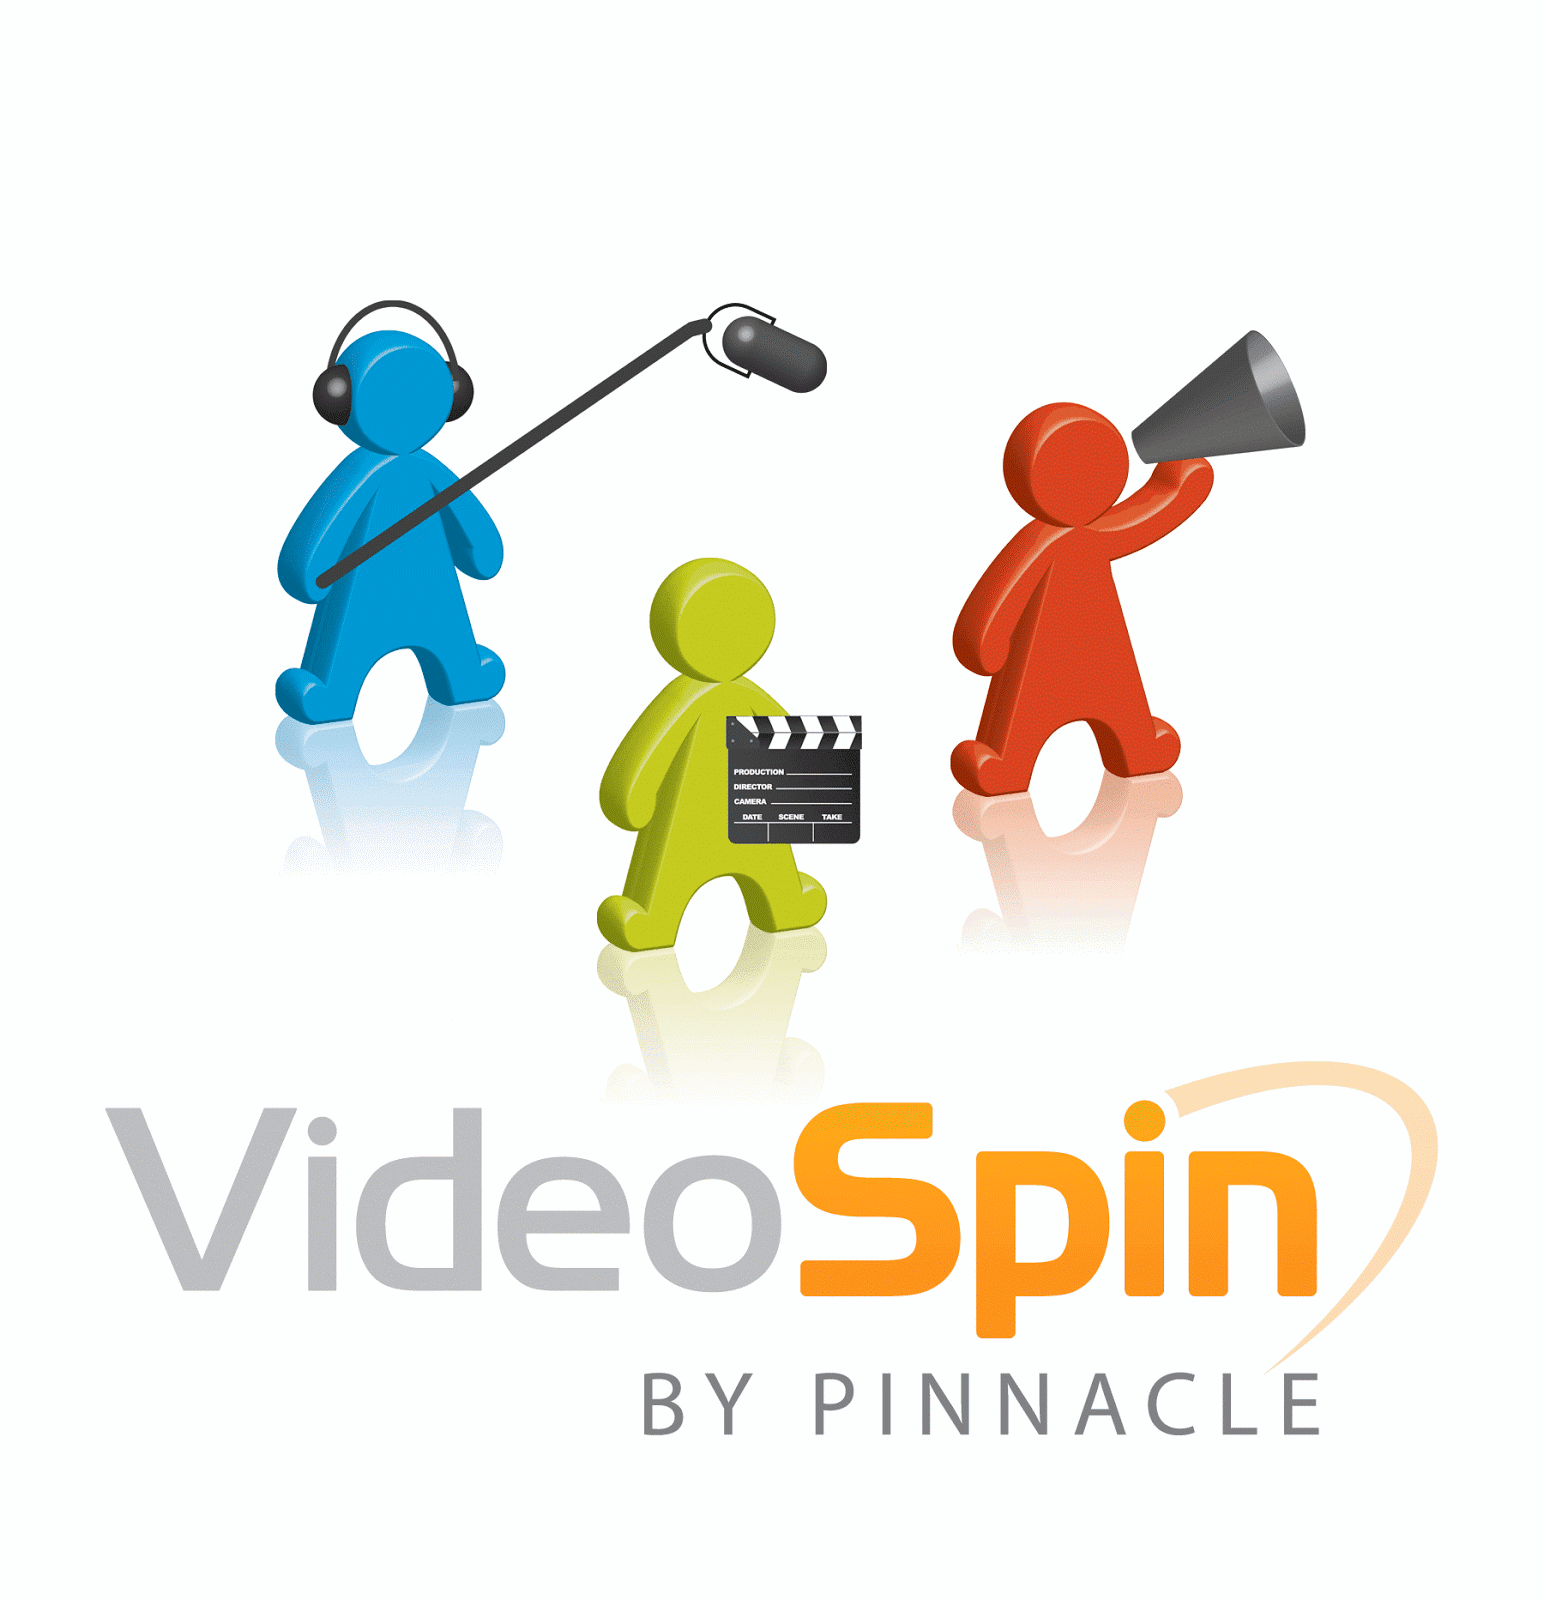 Видео spin. VIDEOSPIN. Pinnacle VIDEOSPIN. VIDEOSPIN логотип. Pinnacle VIDEOSPIN логотип.